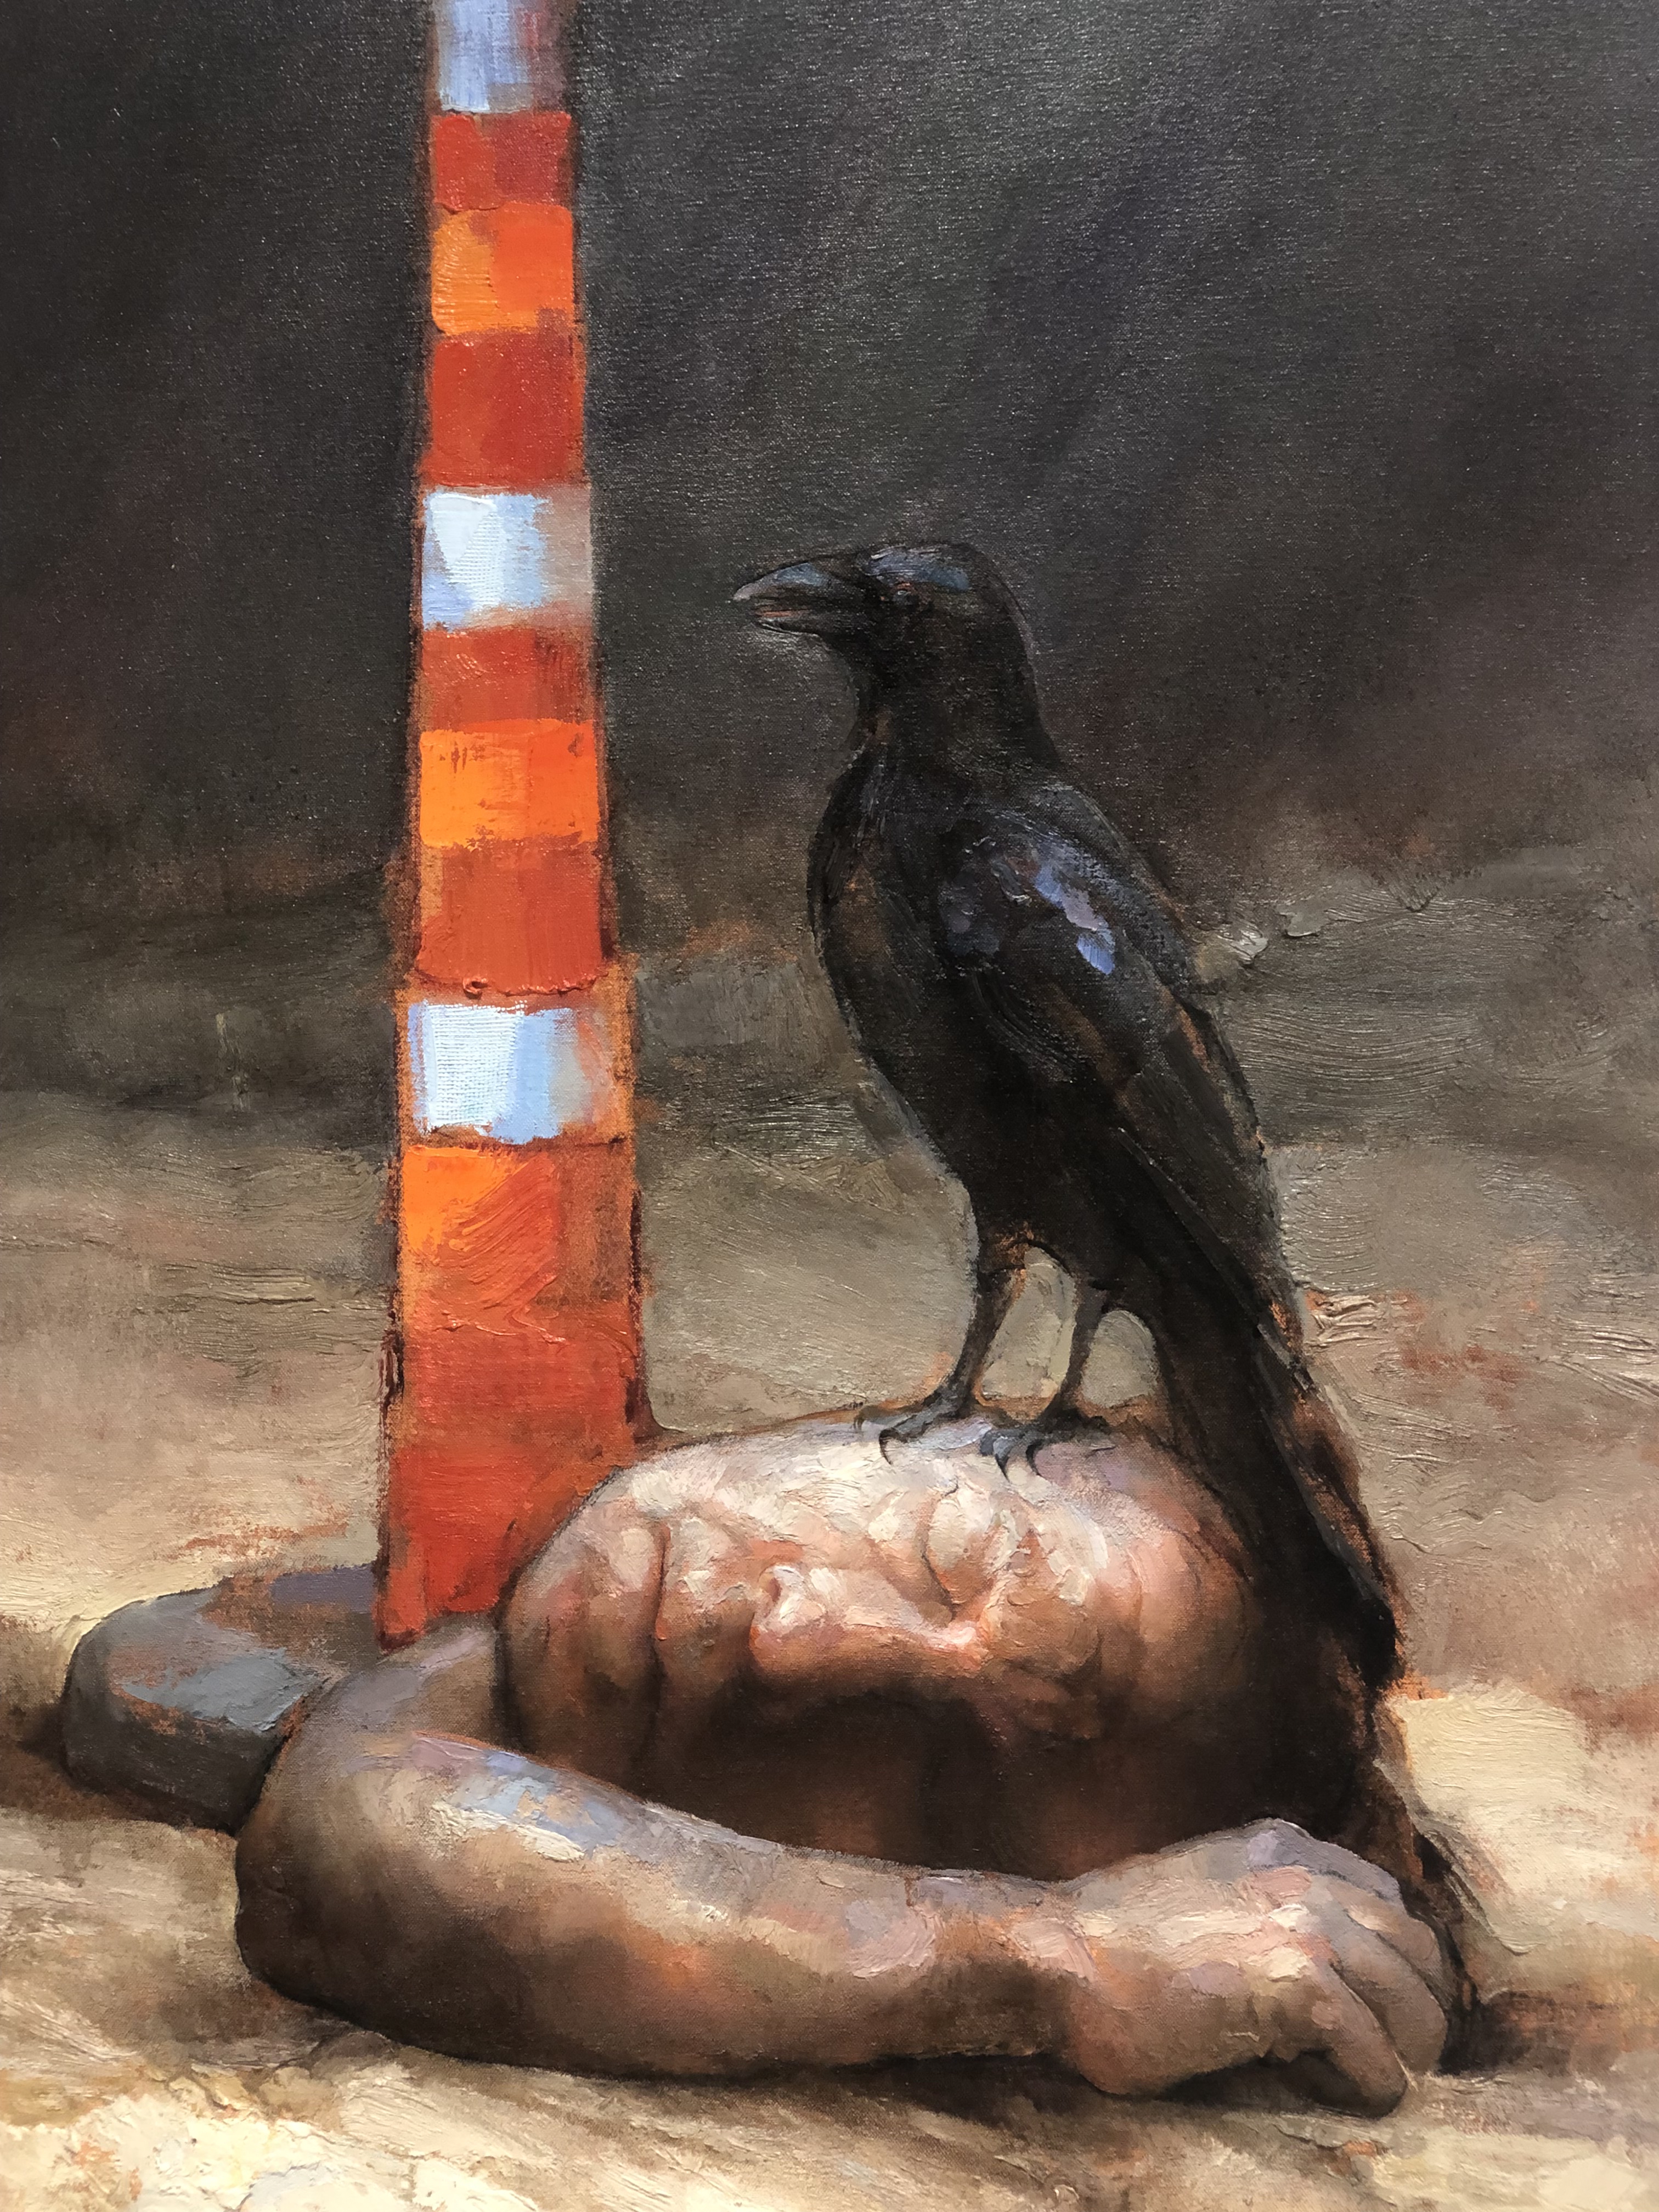 Dark background with disembodied head and arm beneath a raven. An orange and white safety cone stands next to the figures.